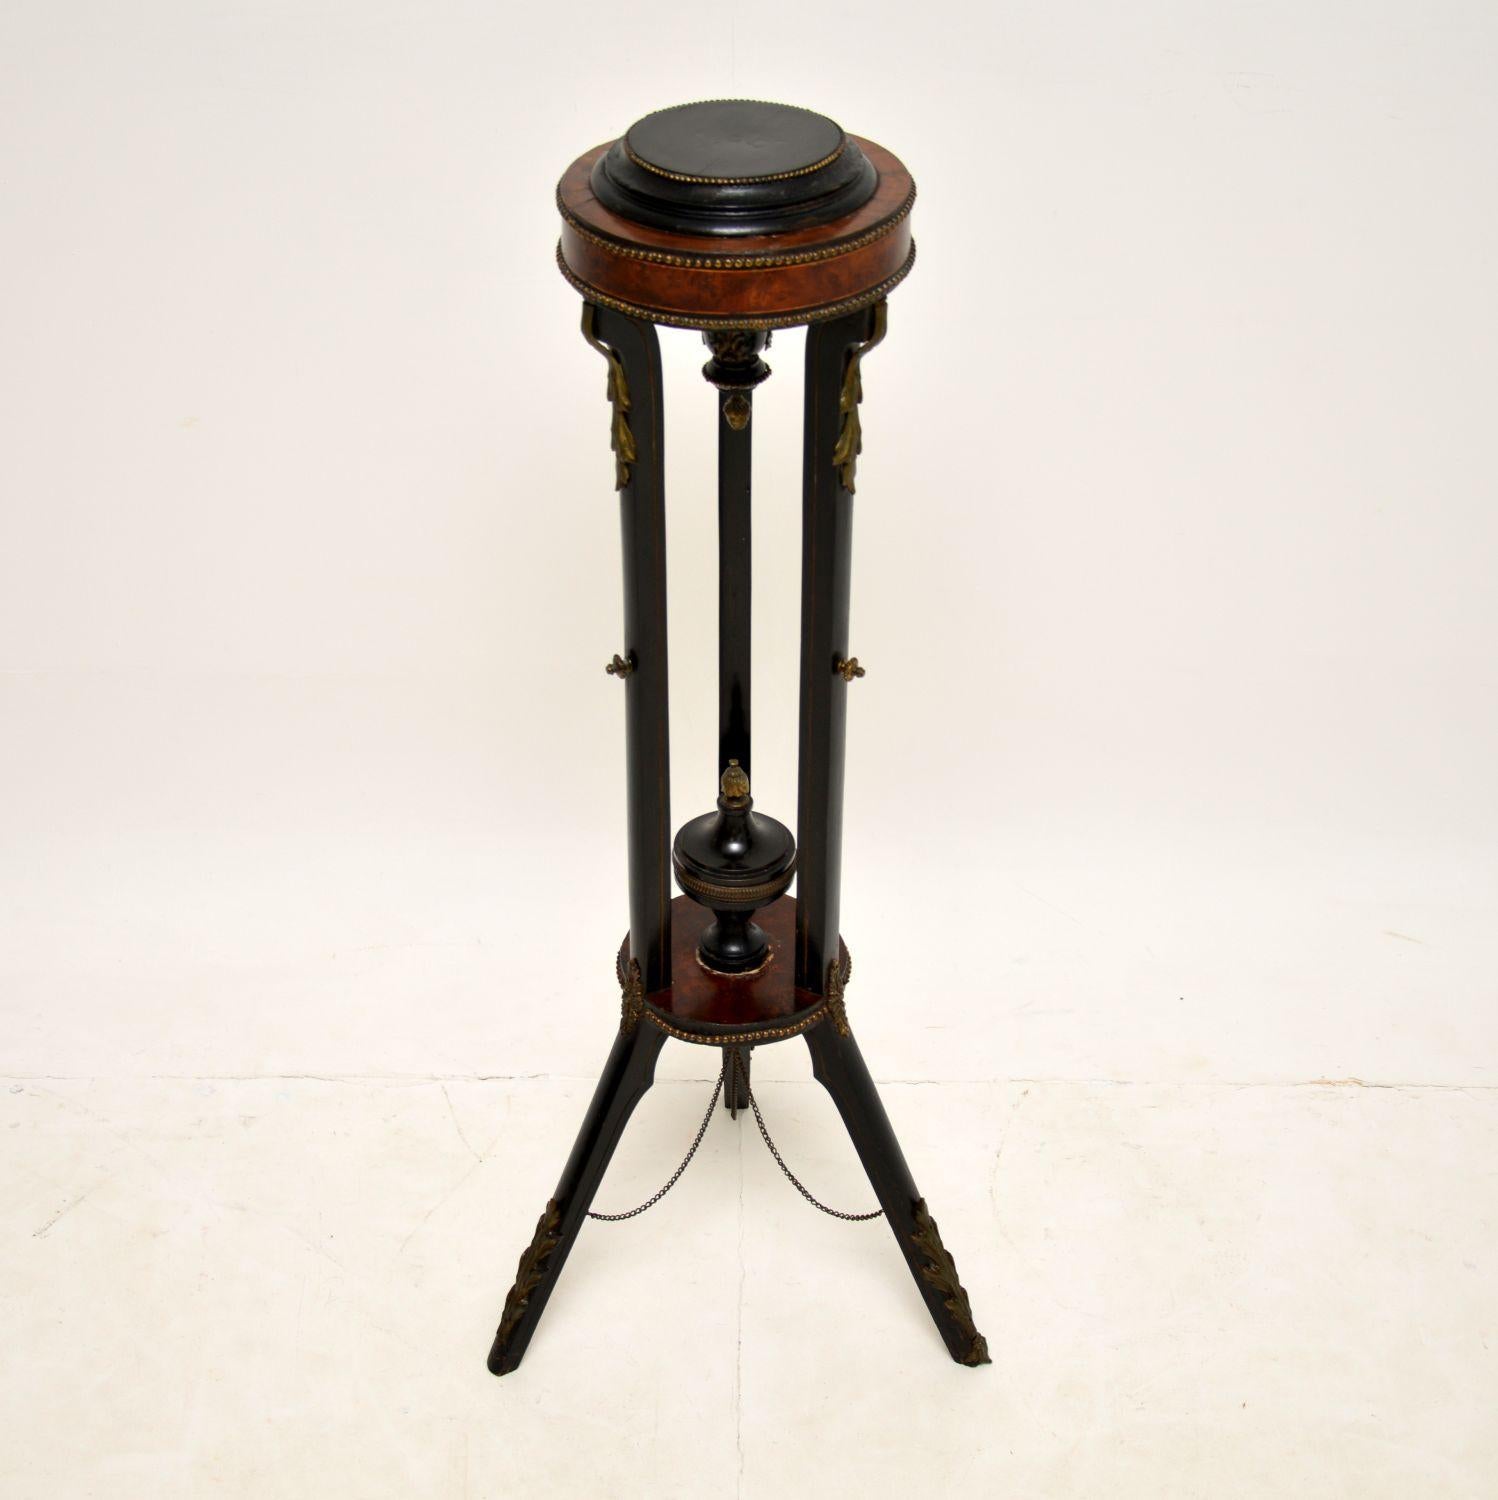 A beautifully designed antique jardiniere / torchere stand in walnut, amboyna and ebonised wood. This was made in France, it dates from around the 1860-1880 period.

It is of excellent quality, and is perfect for use as a plant stand or an object